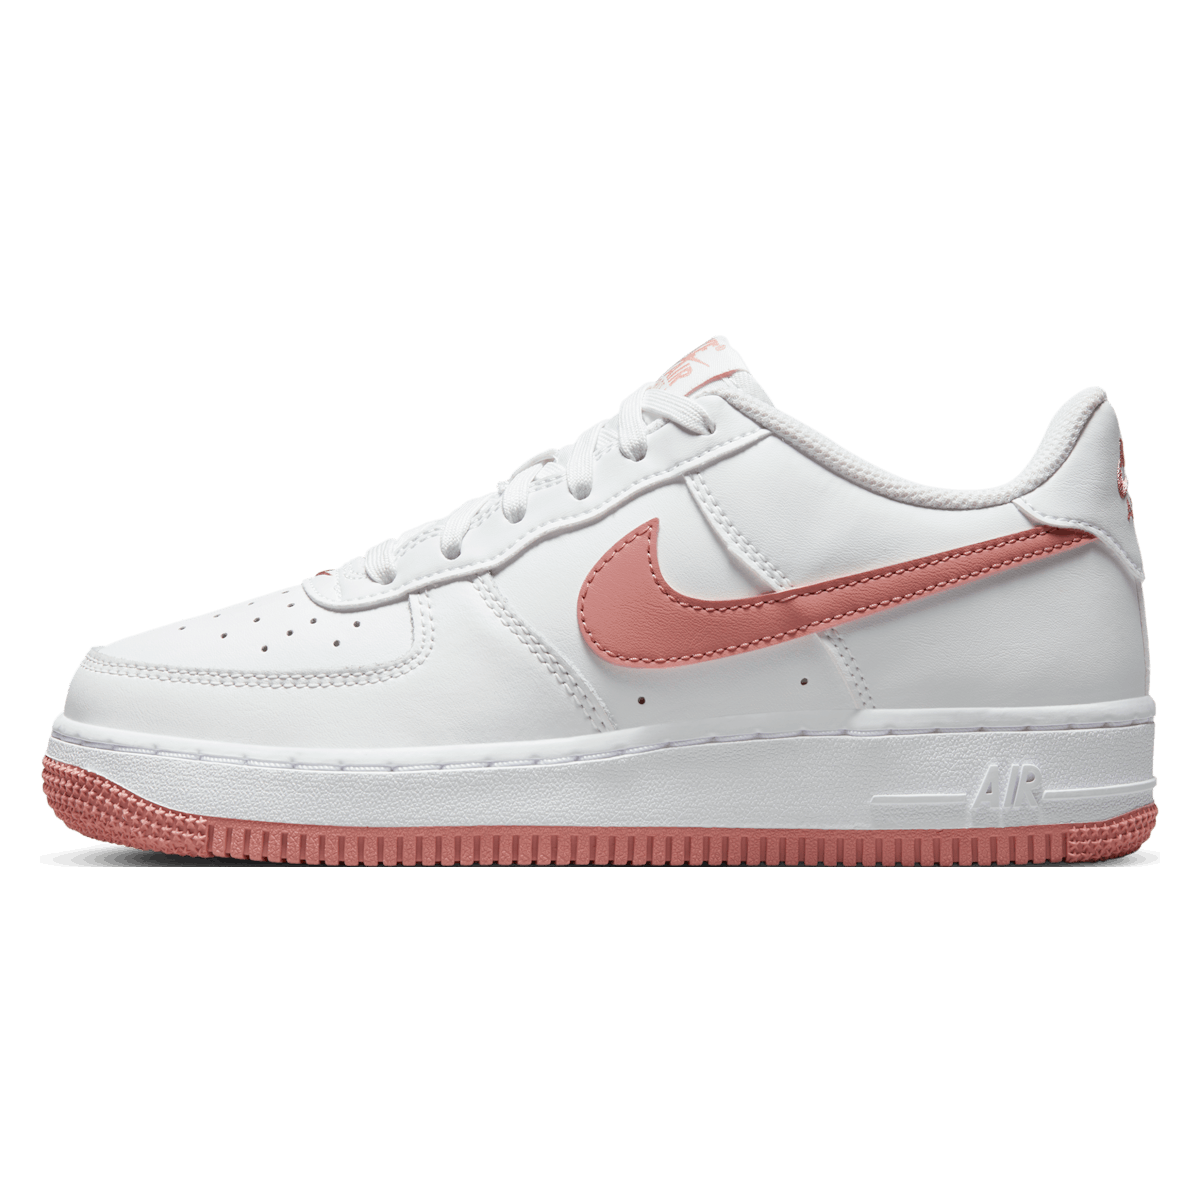 Nike Air Force 1 GS "Red Stardust"